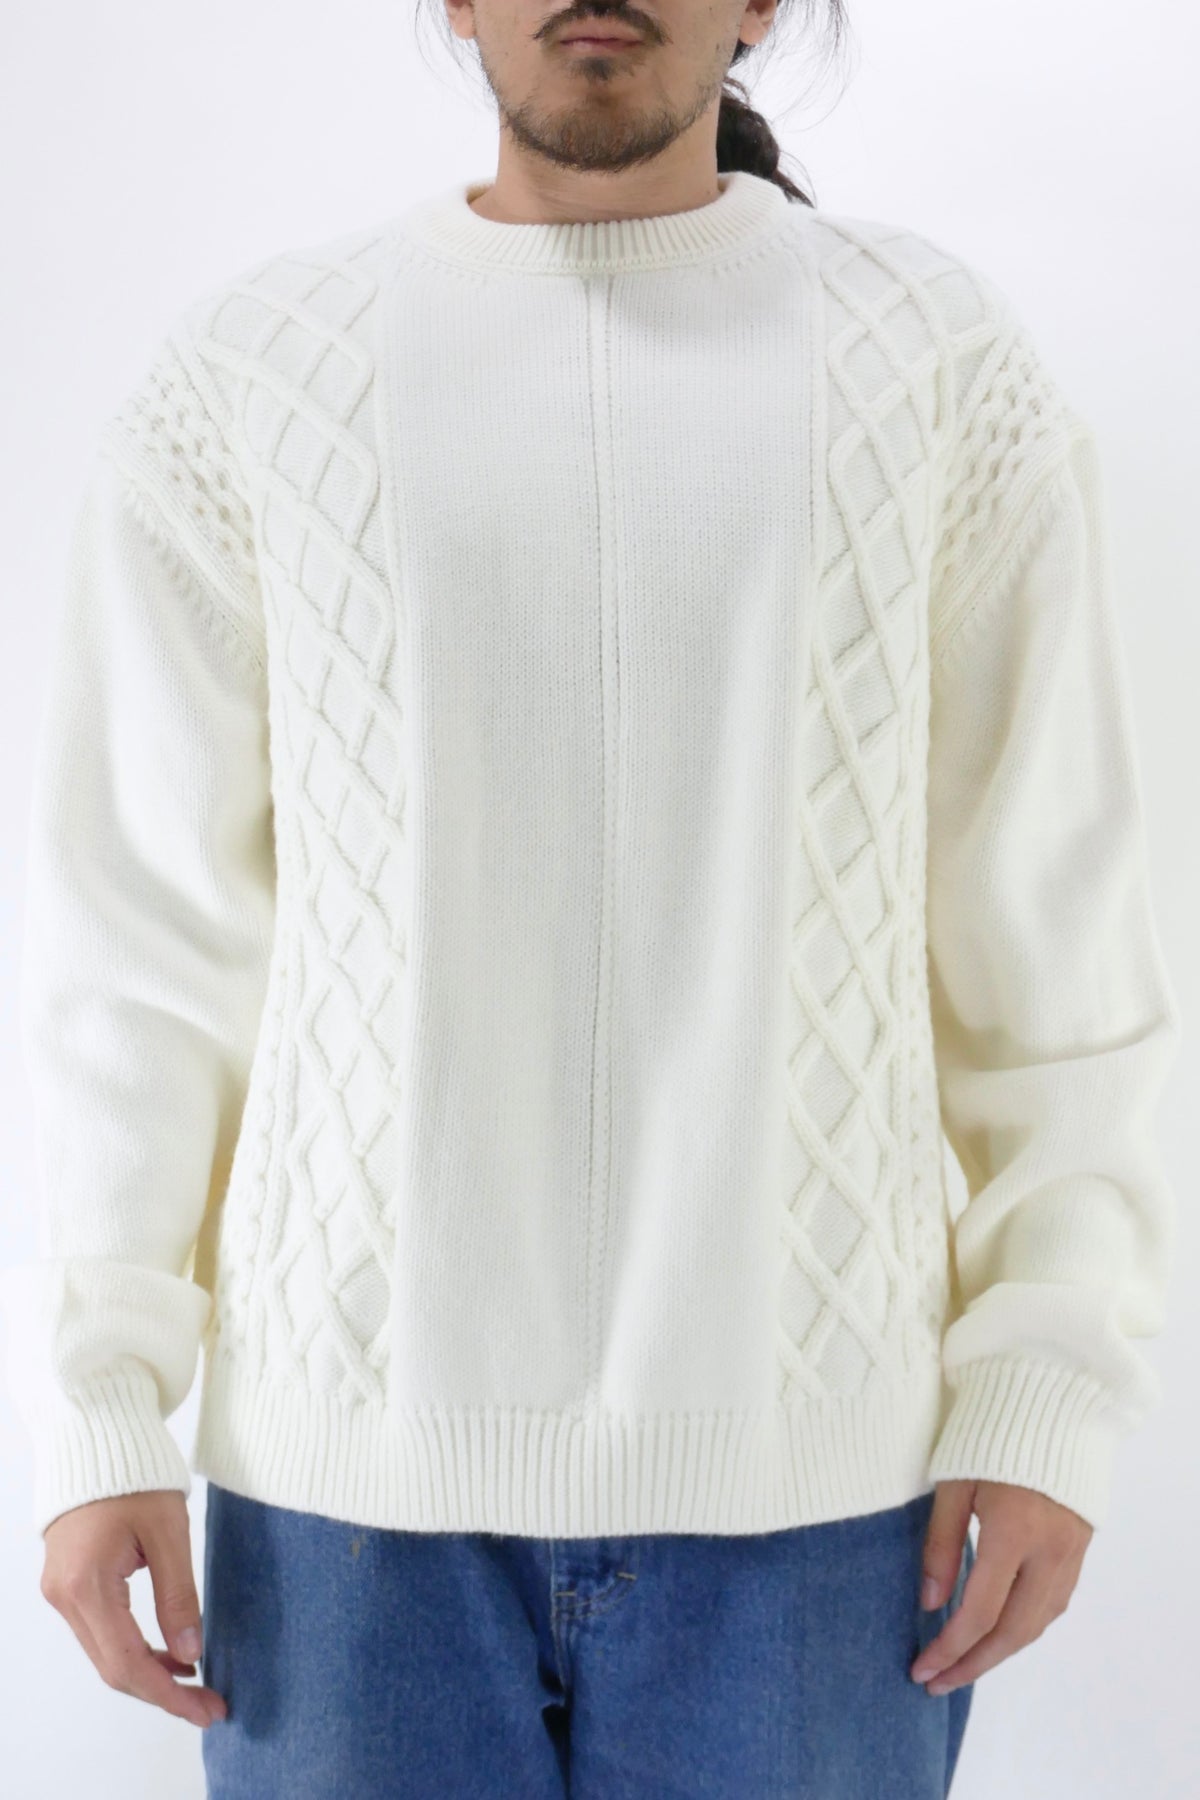 Family First Braided Crewneck Sweater - White